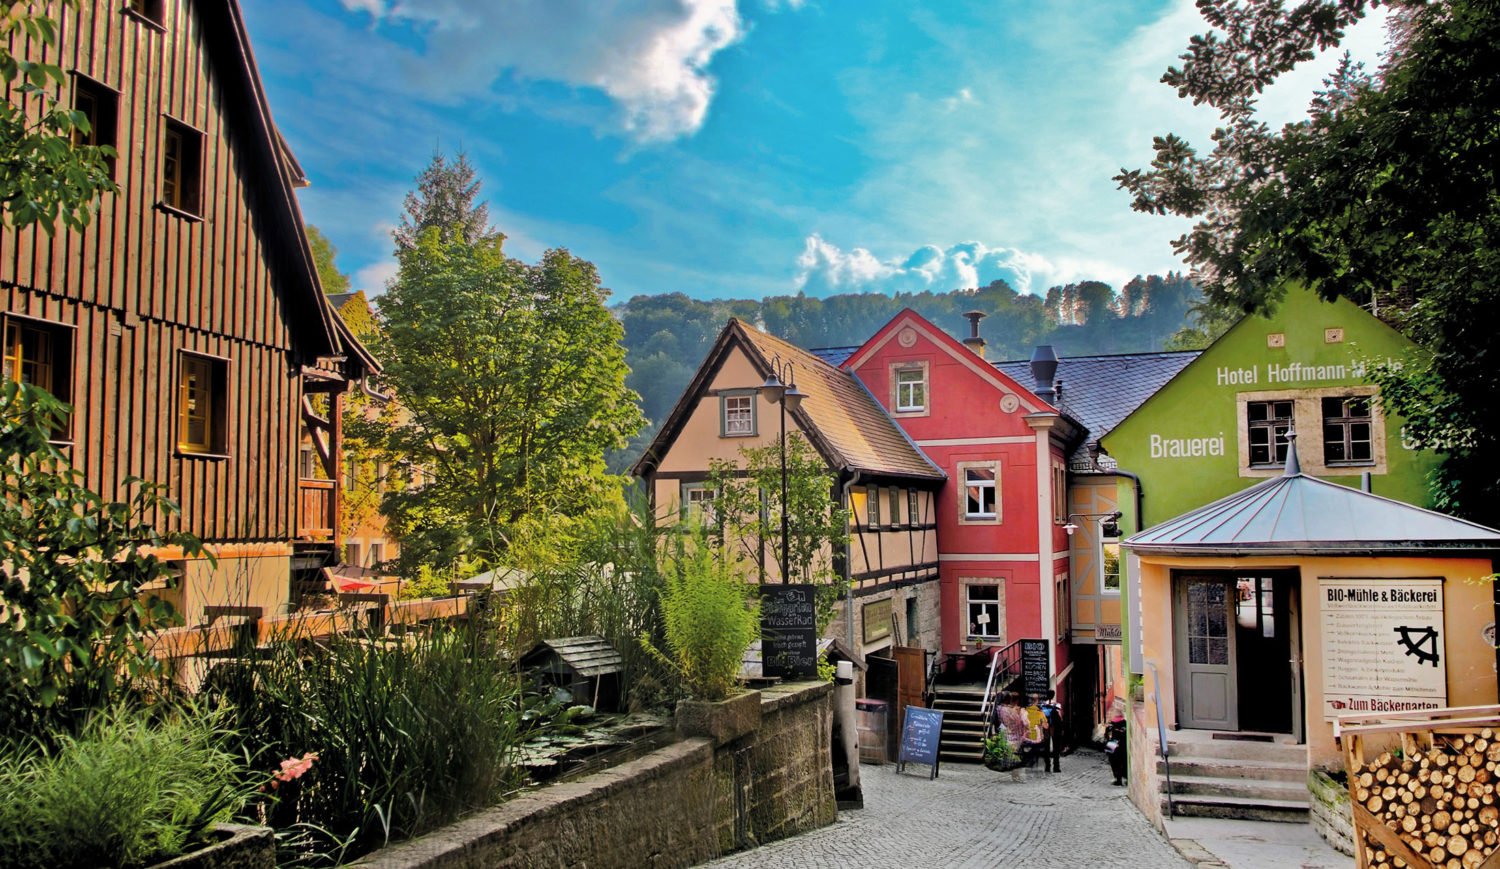 Schmilka, a district of Bad Schandau, is located directly in the Saxon Switzerland National Park